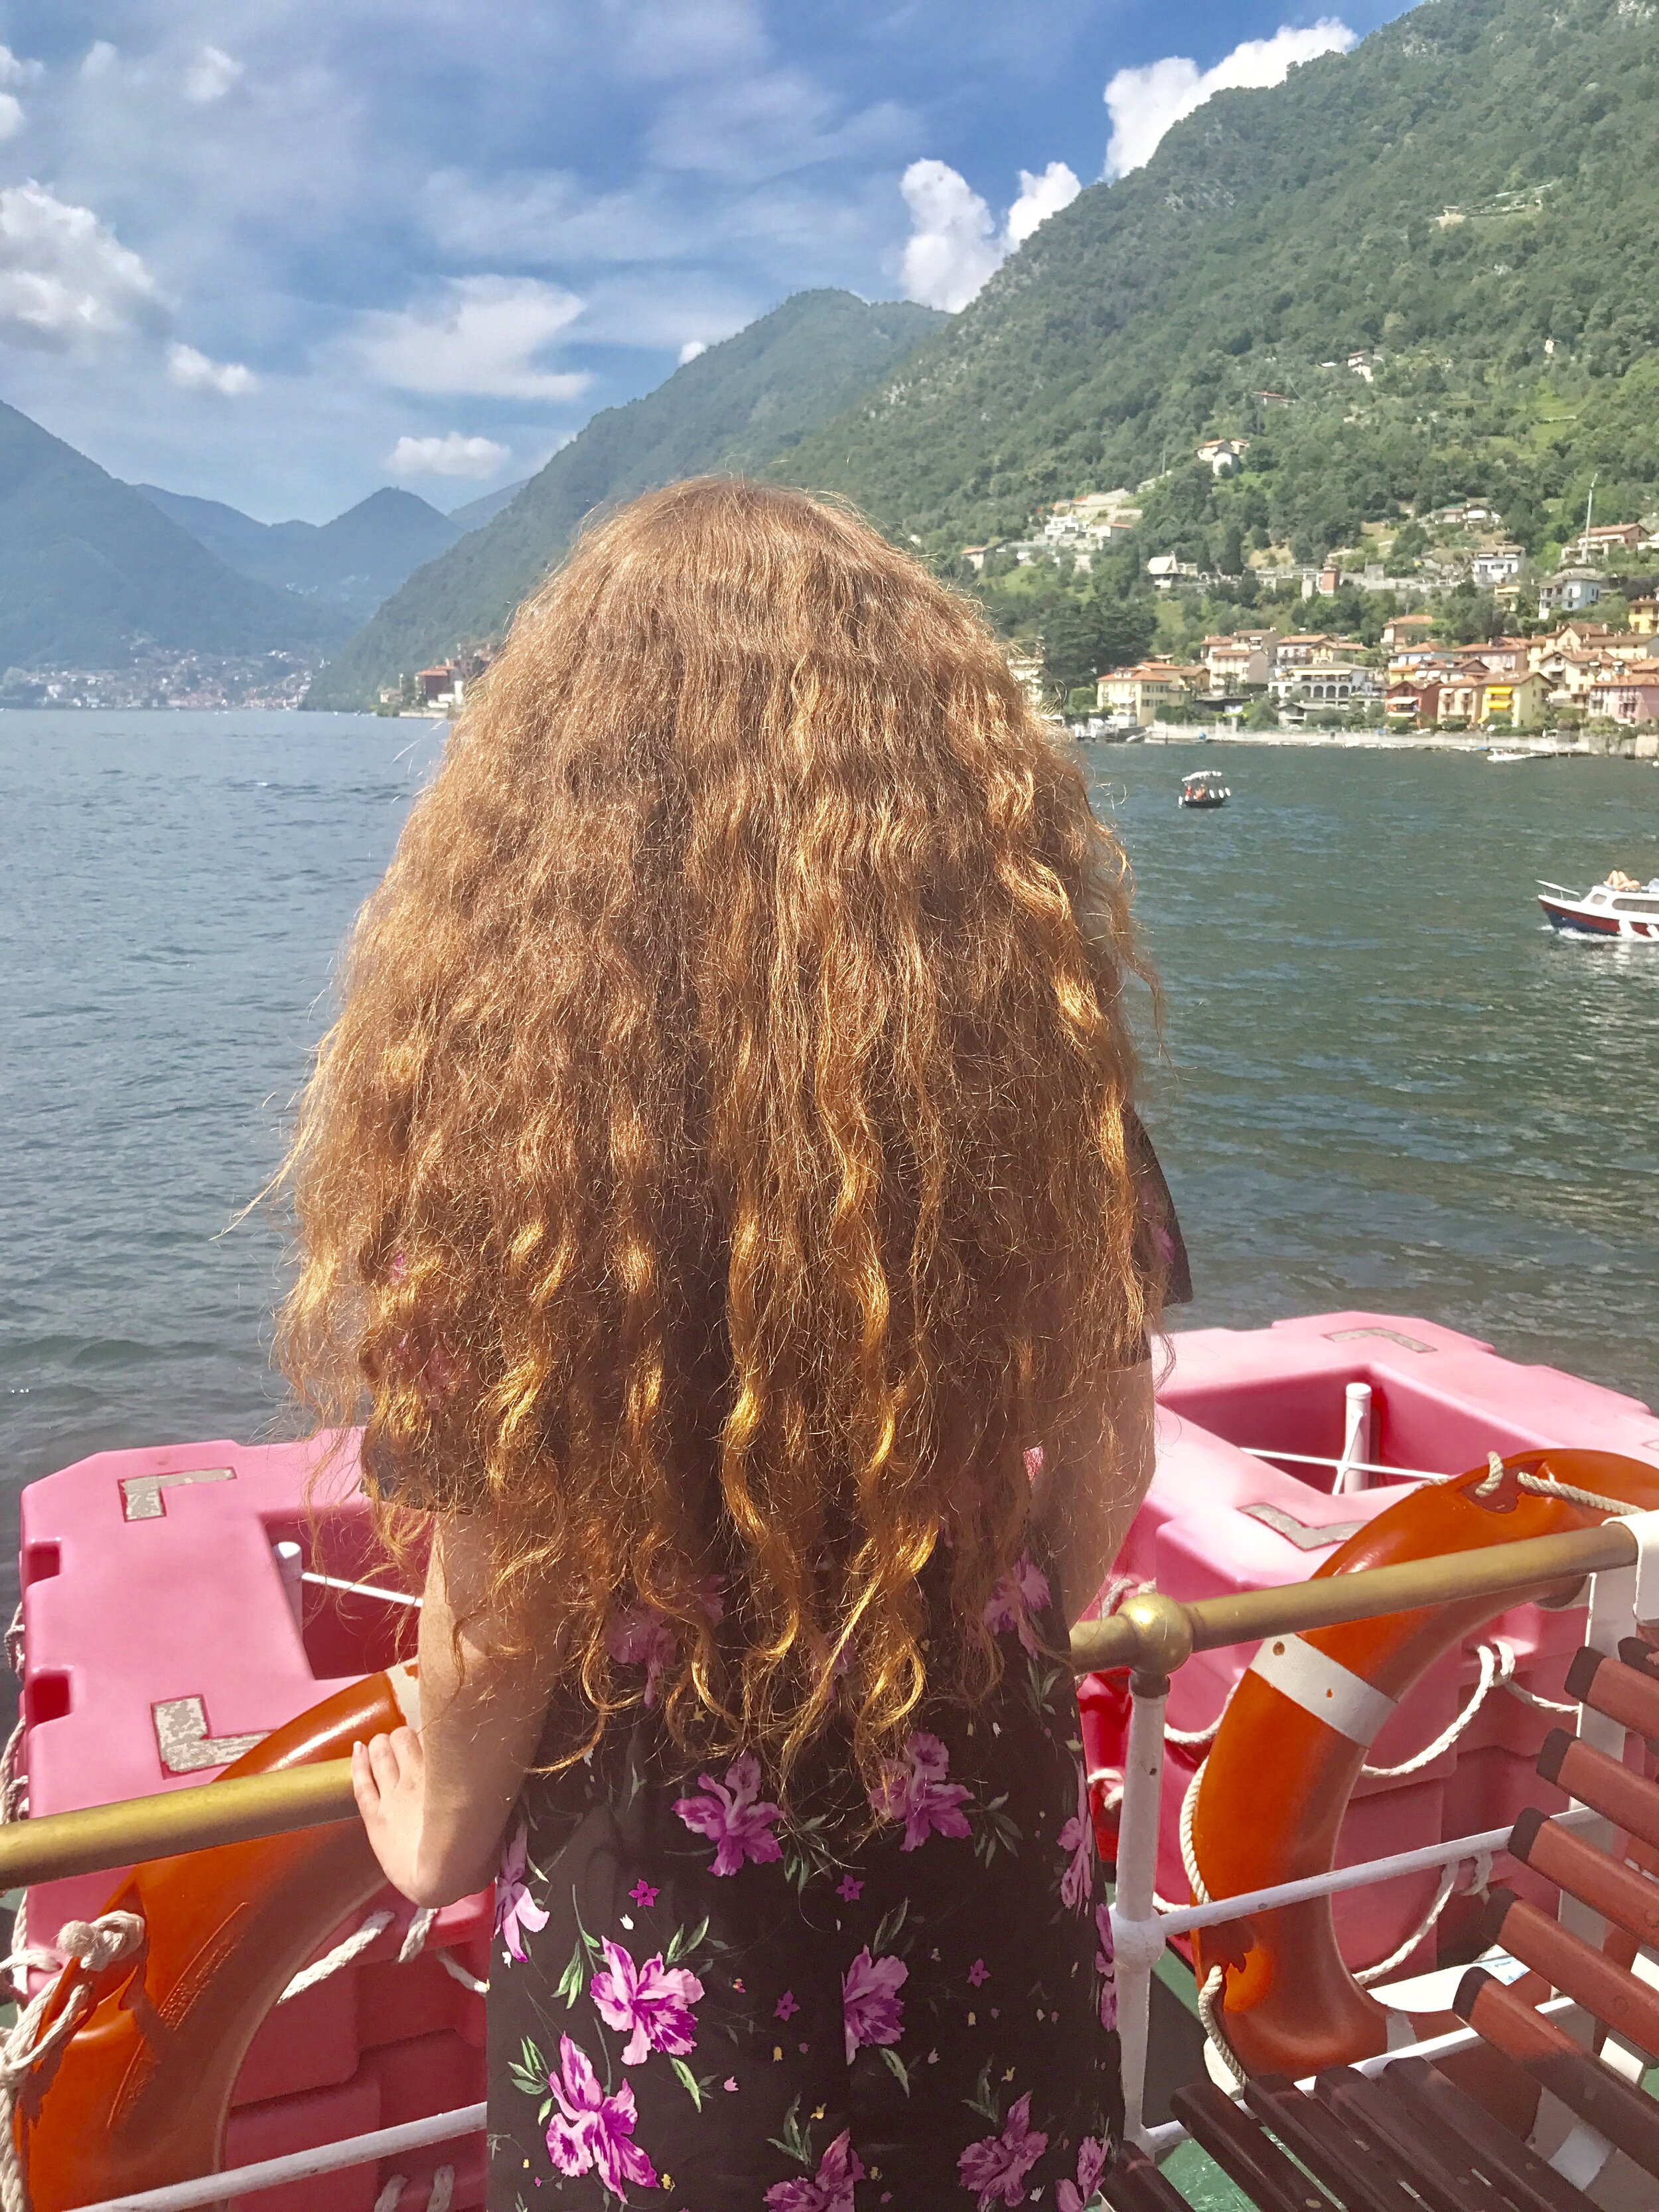 Lake Como Travel Guide: The ferry boat that we took to get from Como to Bellagio